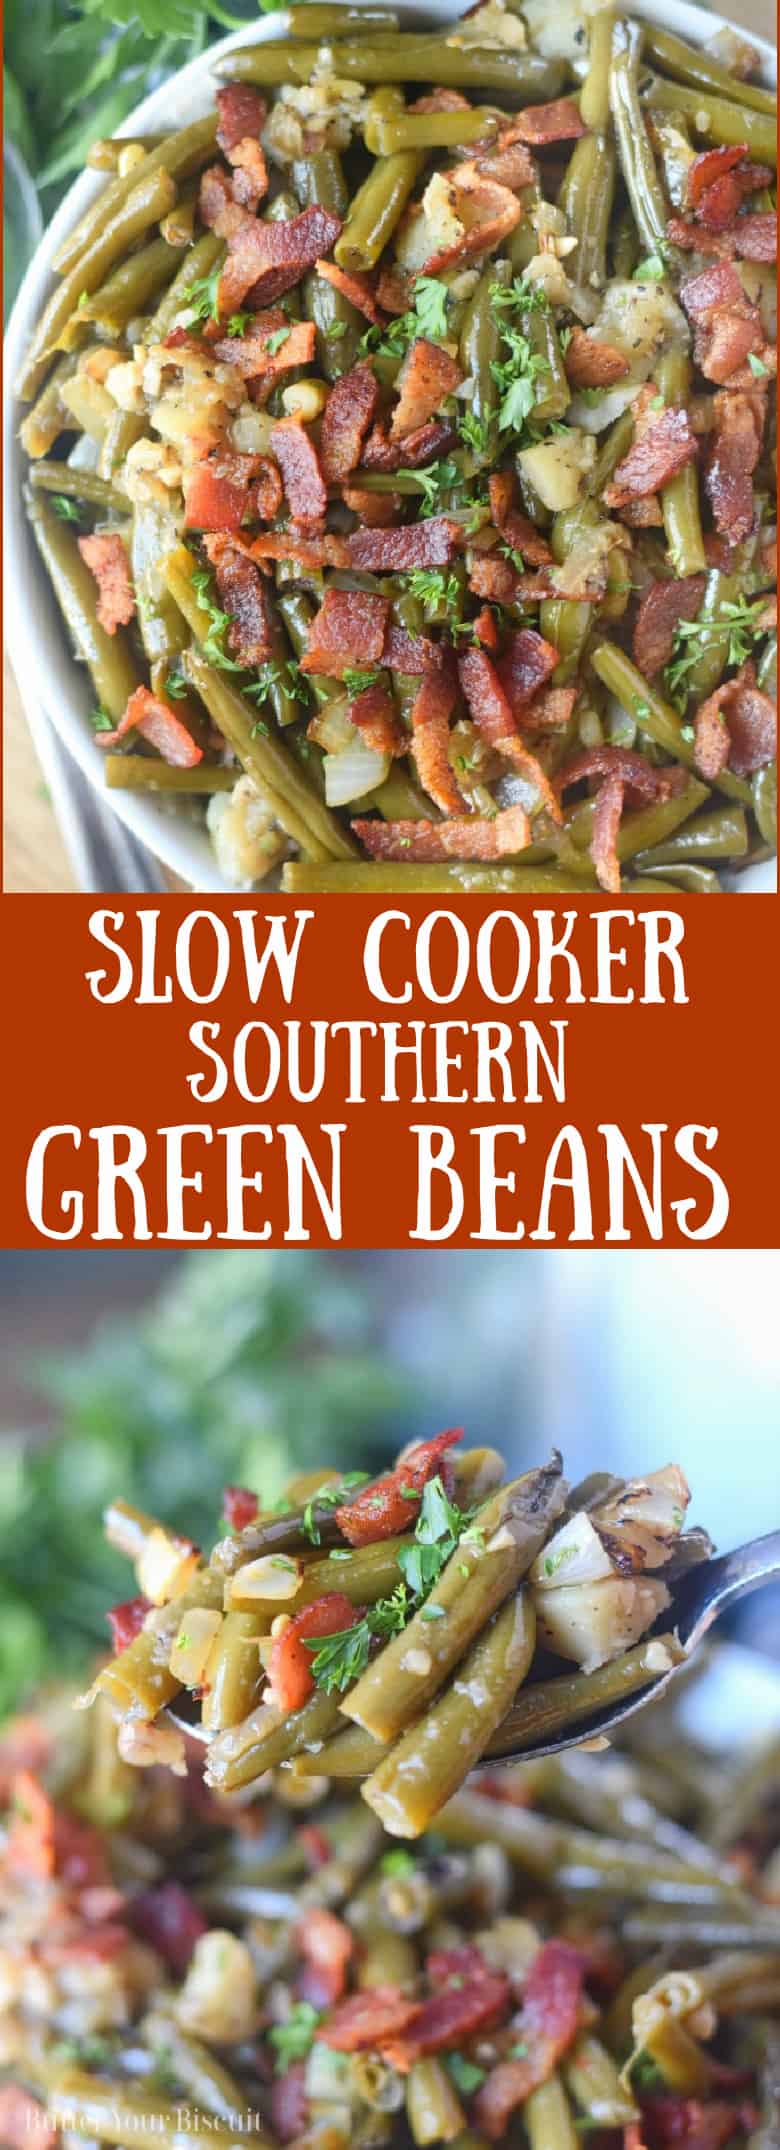 Slow Cooker Green Beans Recipe- Butter Your Biscuit